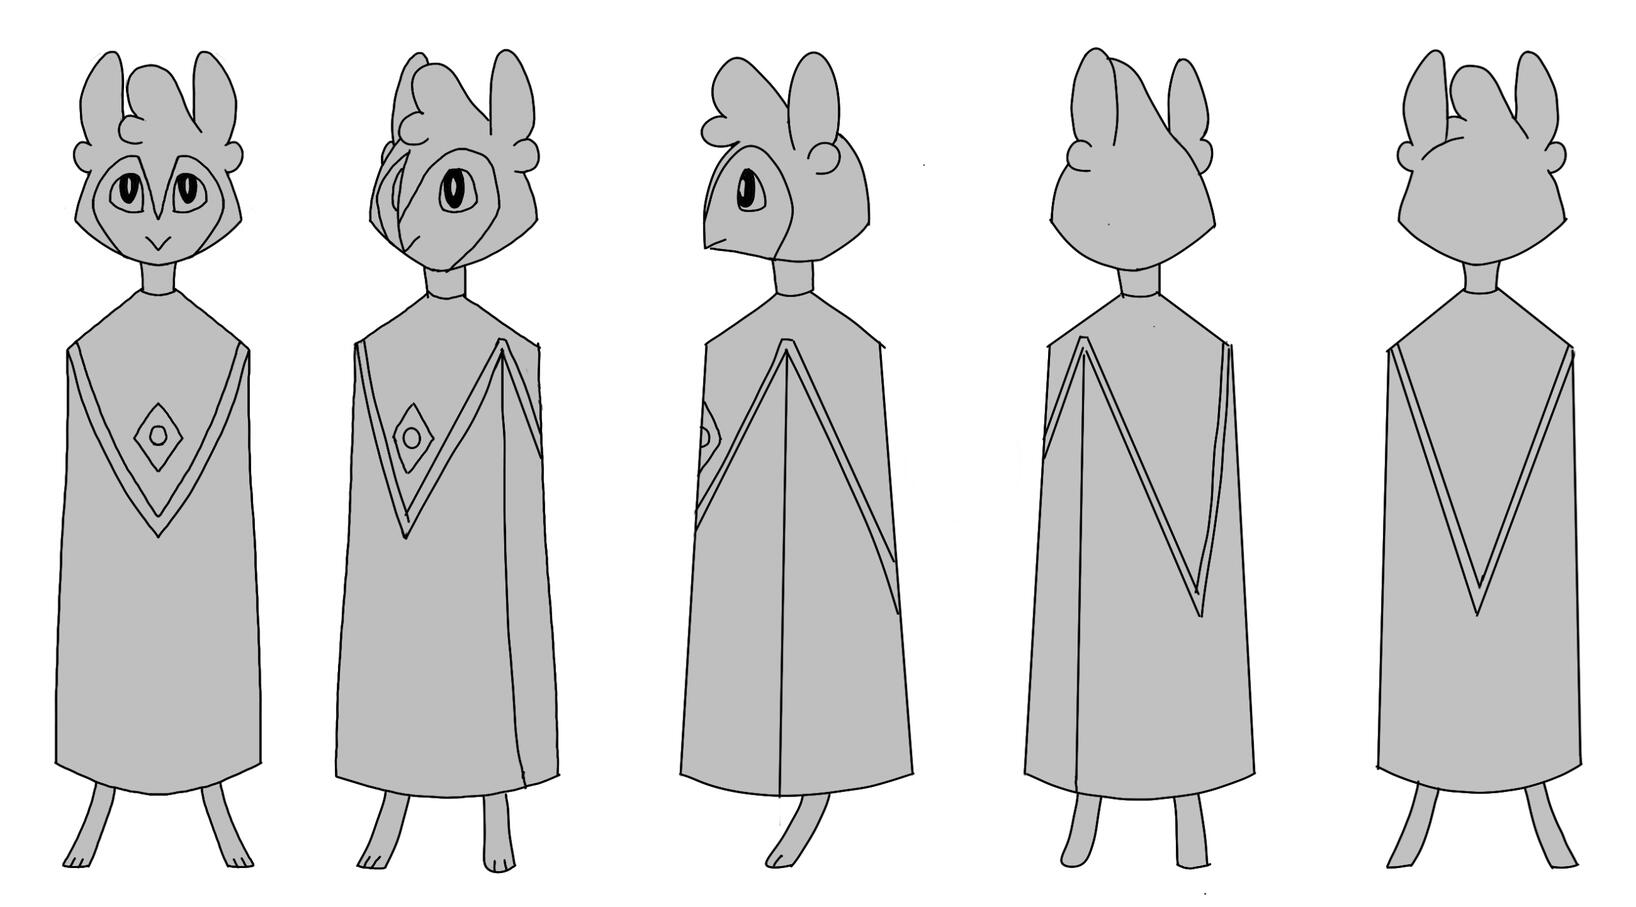 Model sheets for David Doyle student film: Out Of The Woods